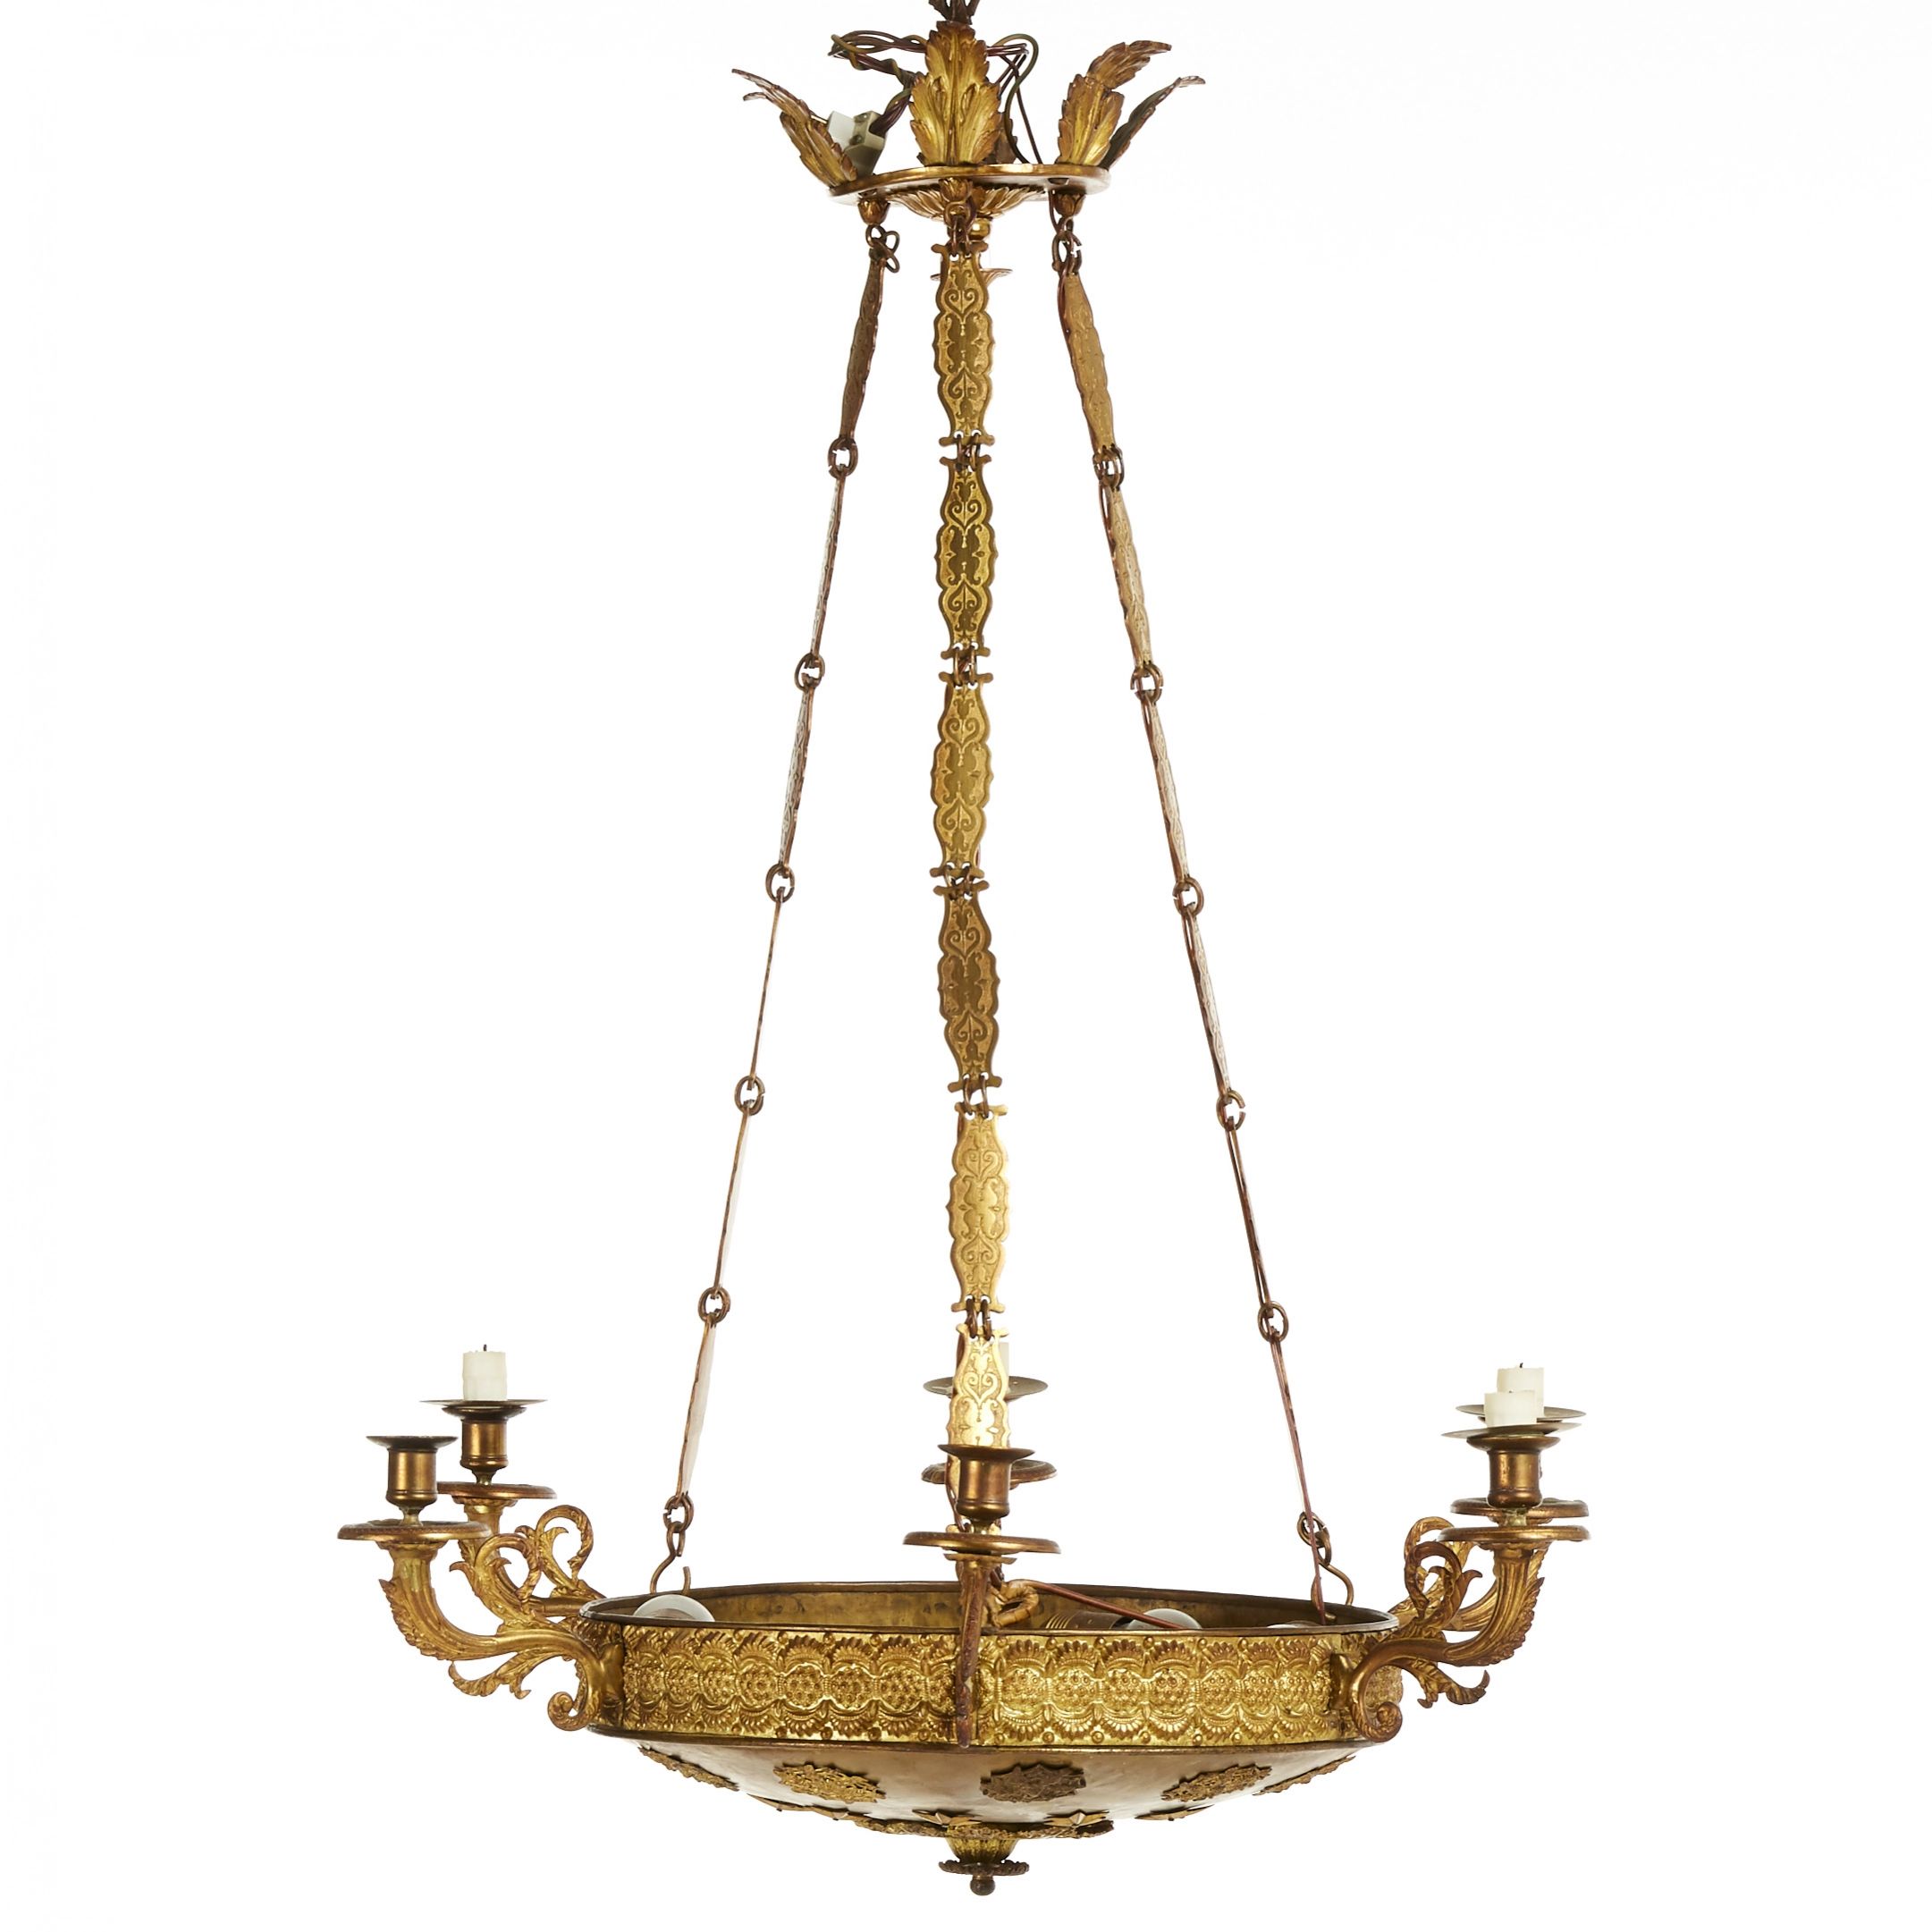 Empire-style-chandelier-Royal-Russia-19th-century-